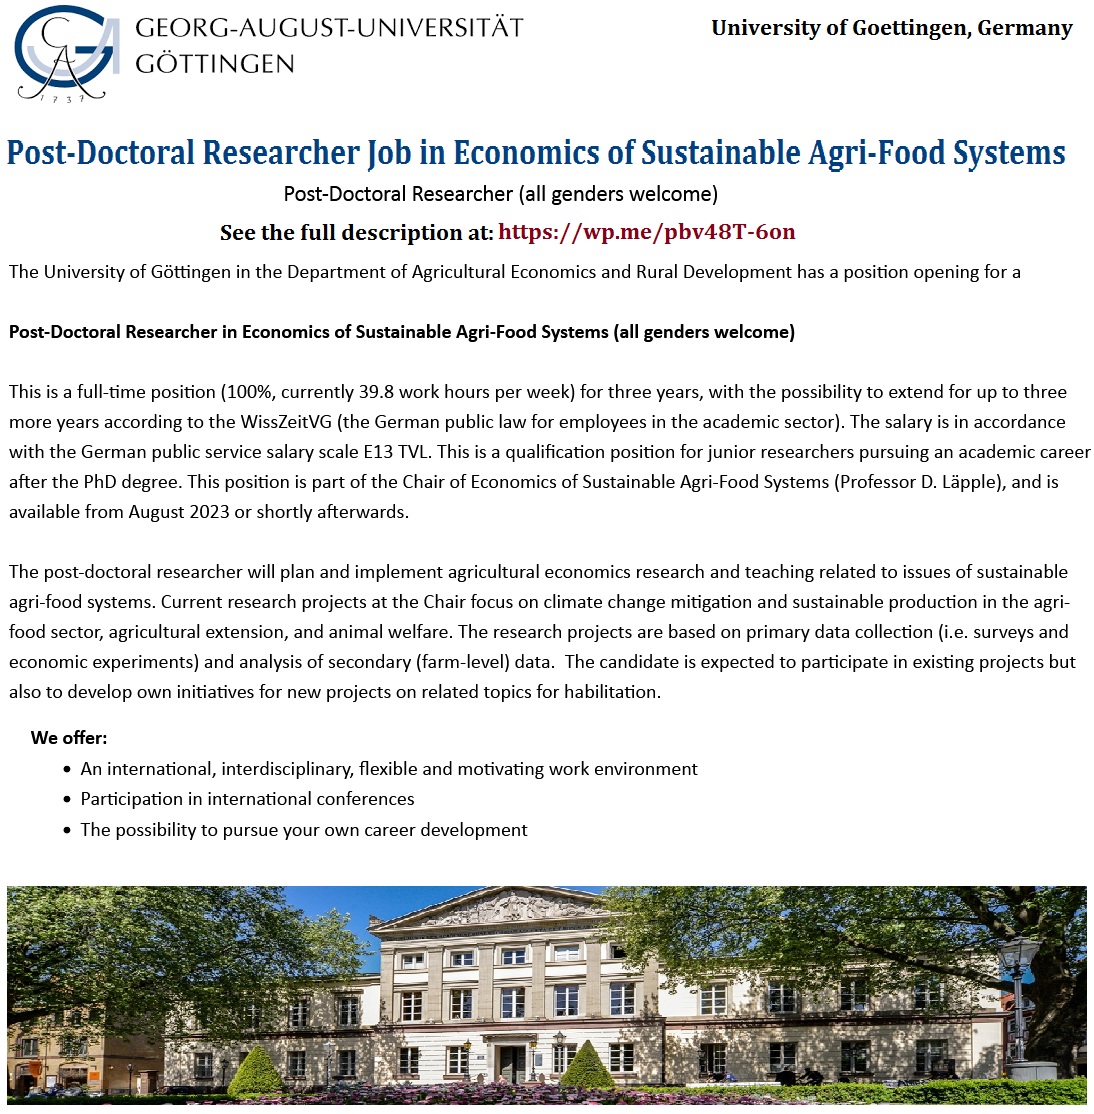 📌 Post-Doctoral Job in Economics of Sustainable Agri-Food Systems at University of Göttingen in Germany ... Please retweet and spread the word! For details visit: wp.me/pbv48T-6on